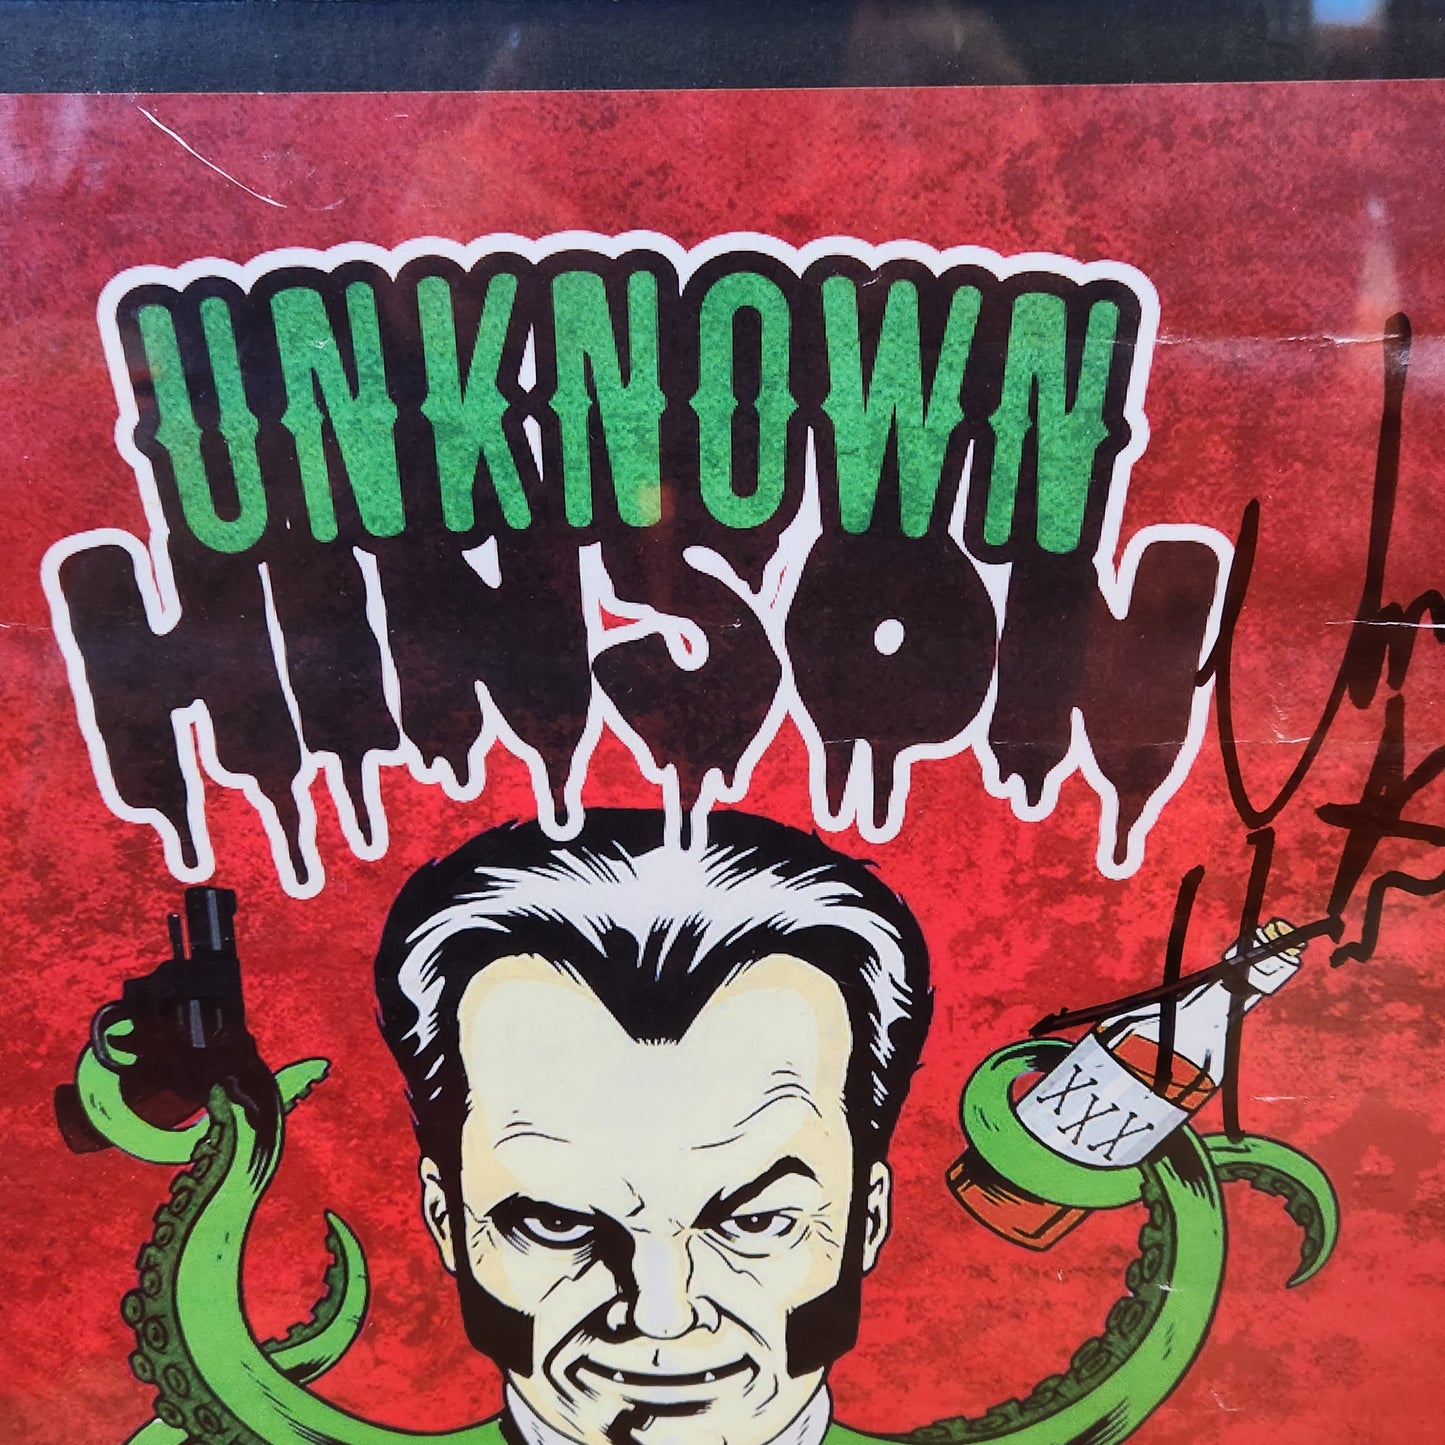 Signed "Unknown Hinson" 2019 Live Show Promo Poster